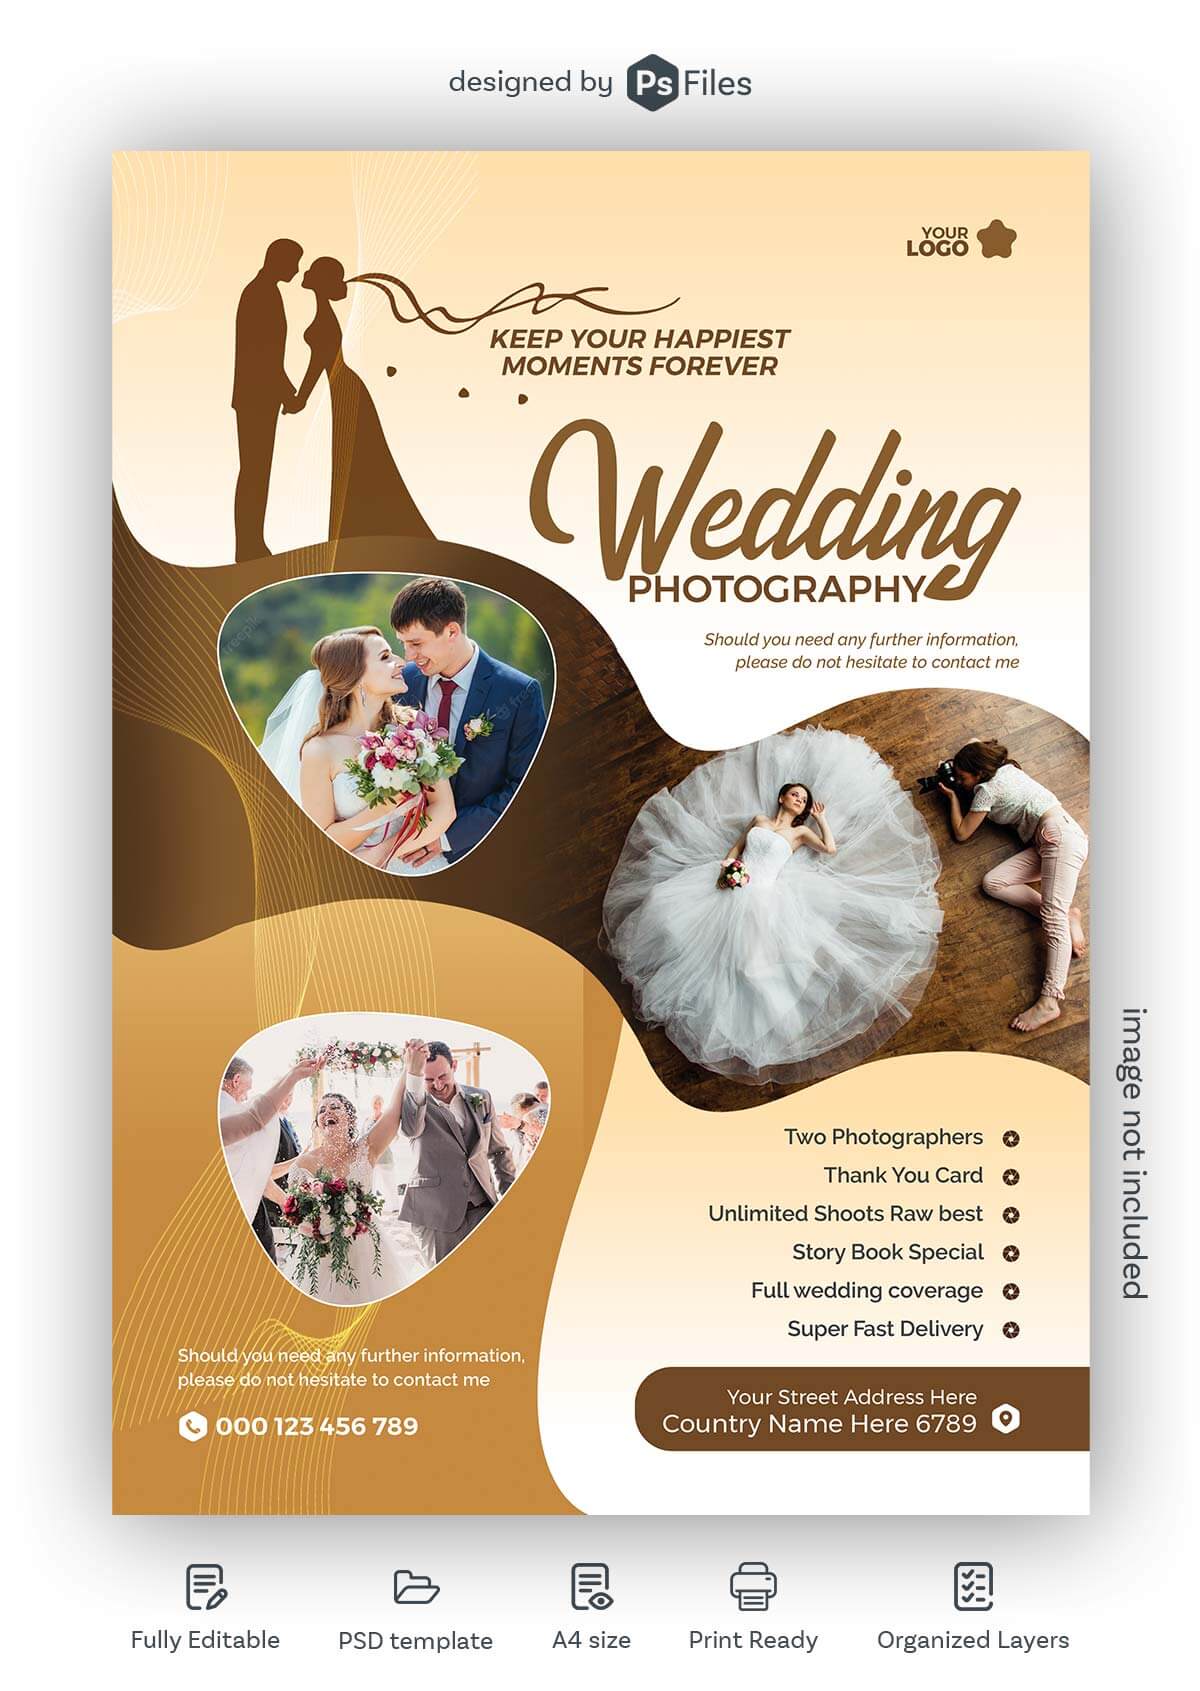 PsFiles Free Wedding Photography and Photographer StudioCreative Flyer PSD Template Download